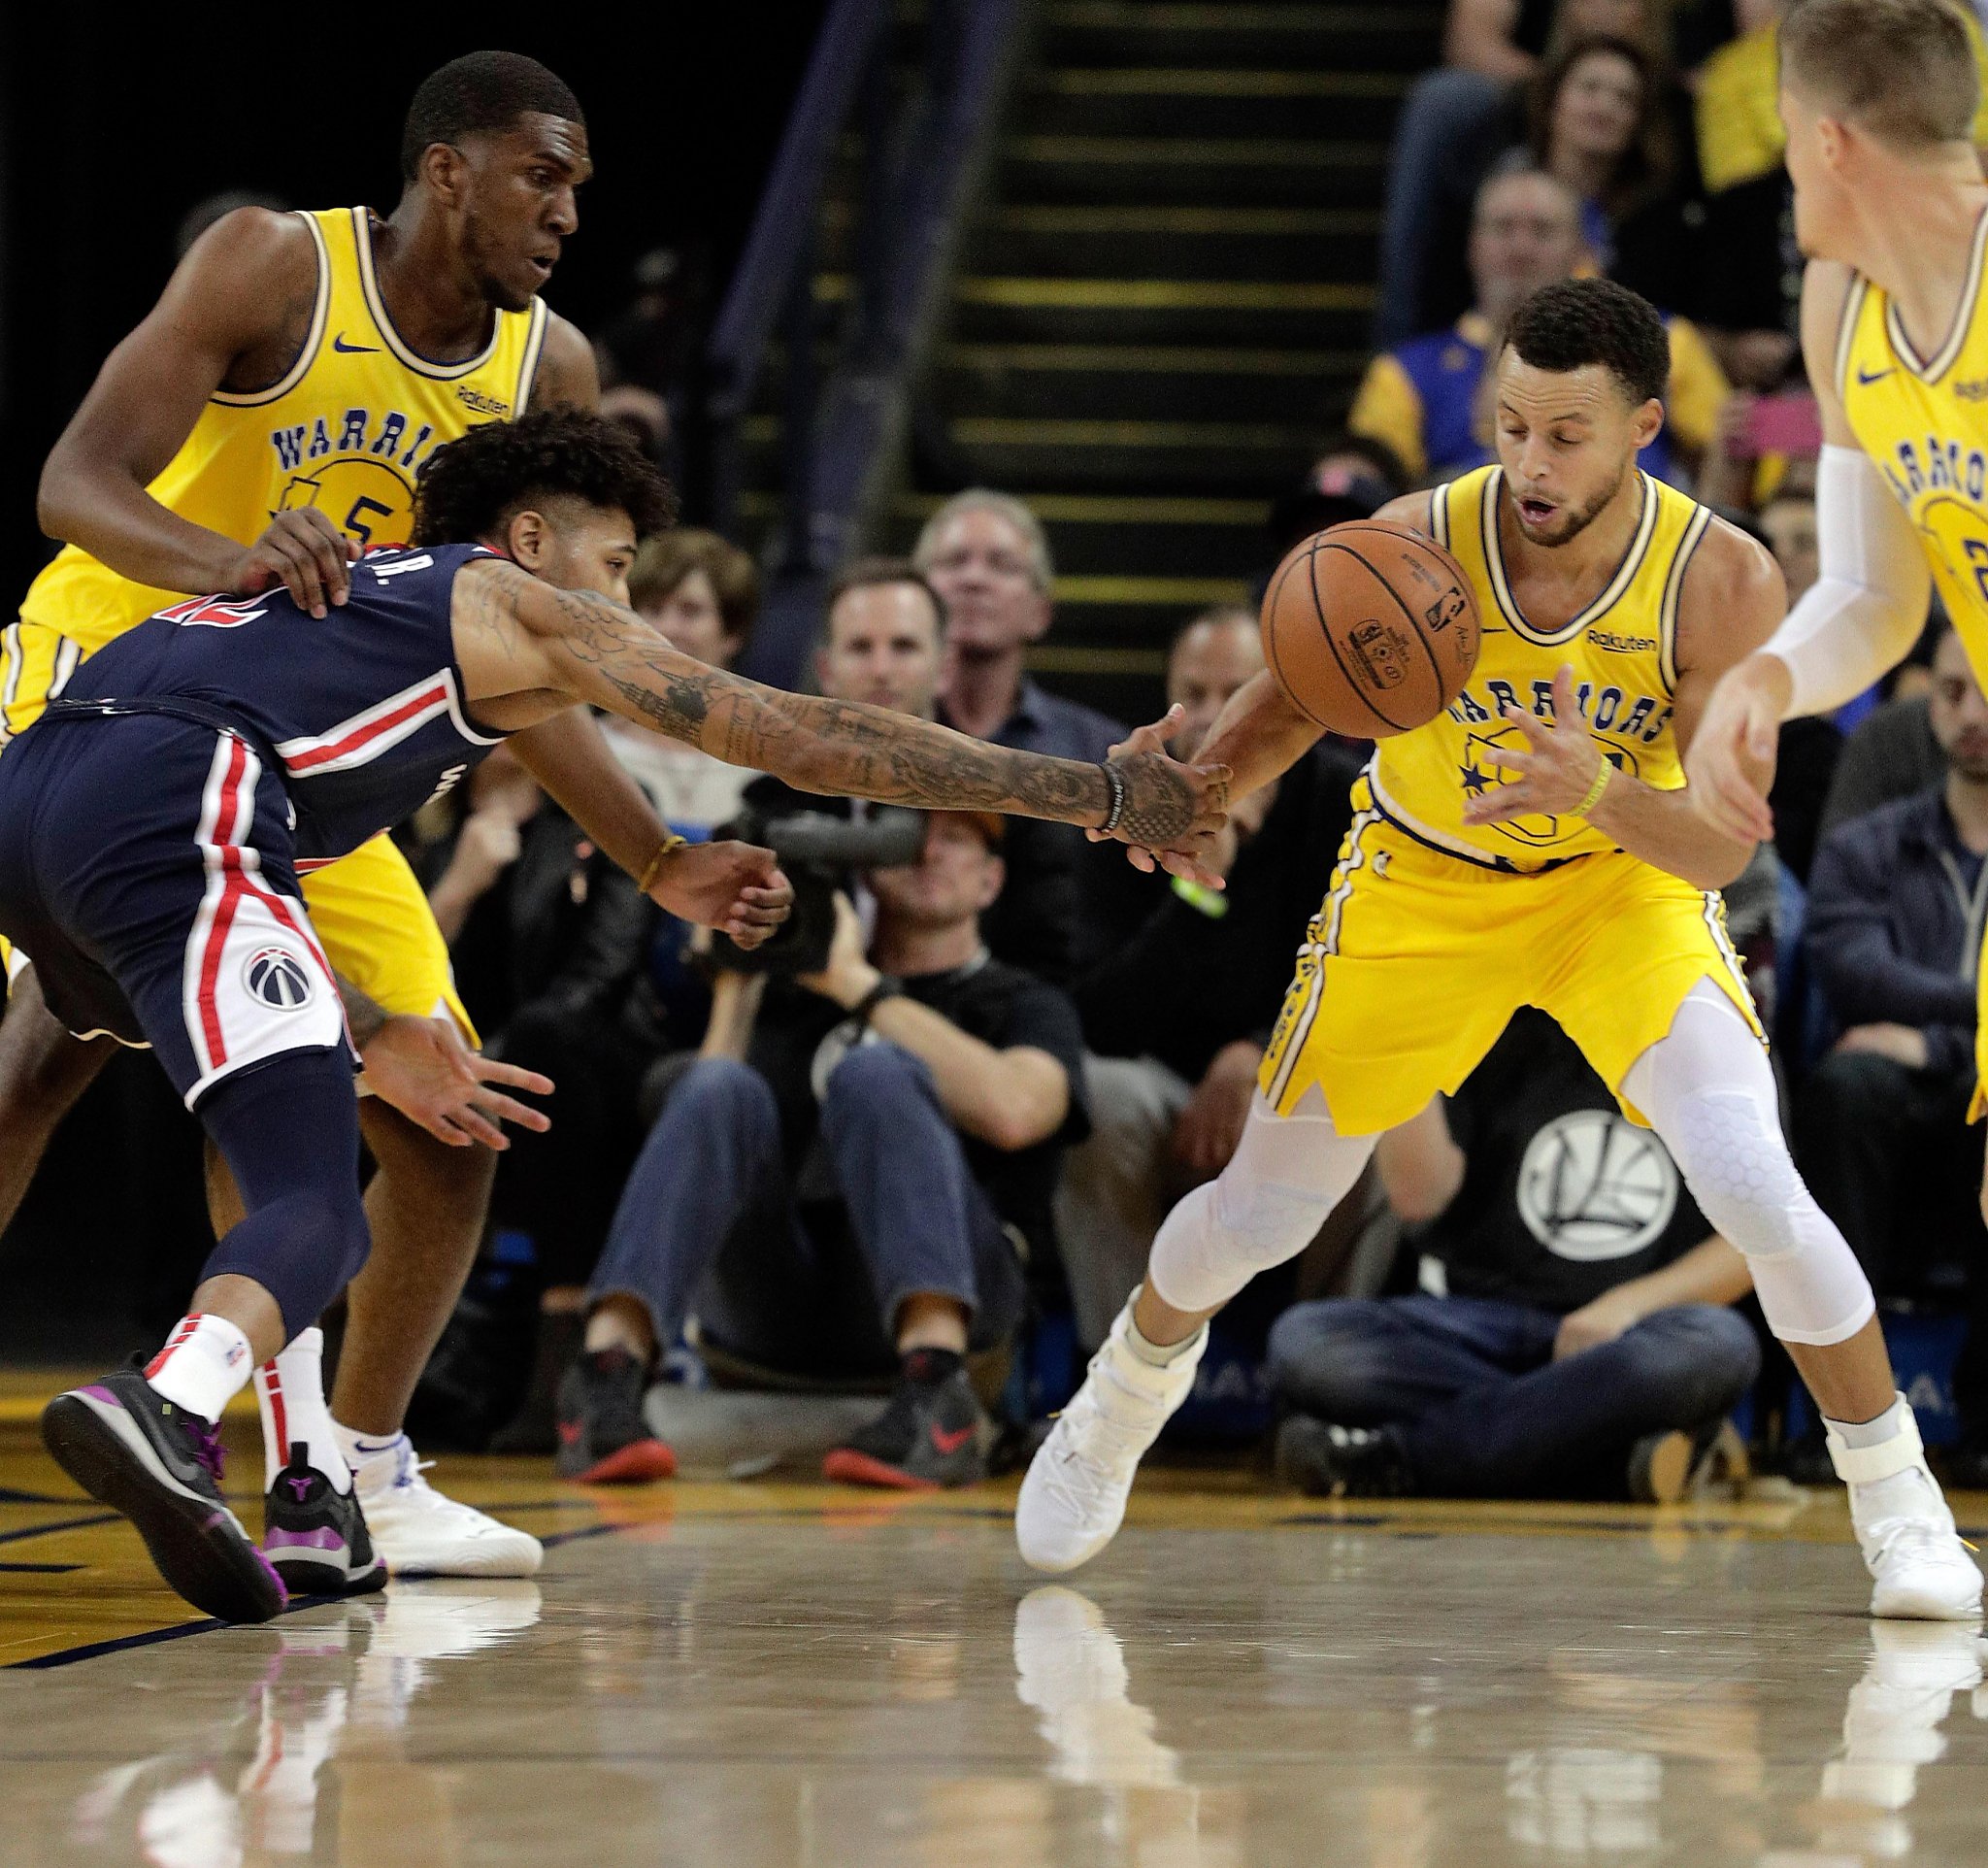 Stephen Curry’s 51-point outburst leaves Wizards exasperated - SFChronicle.com